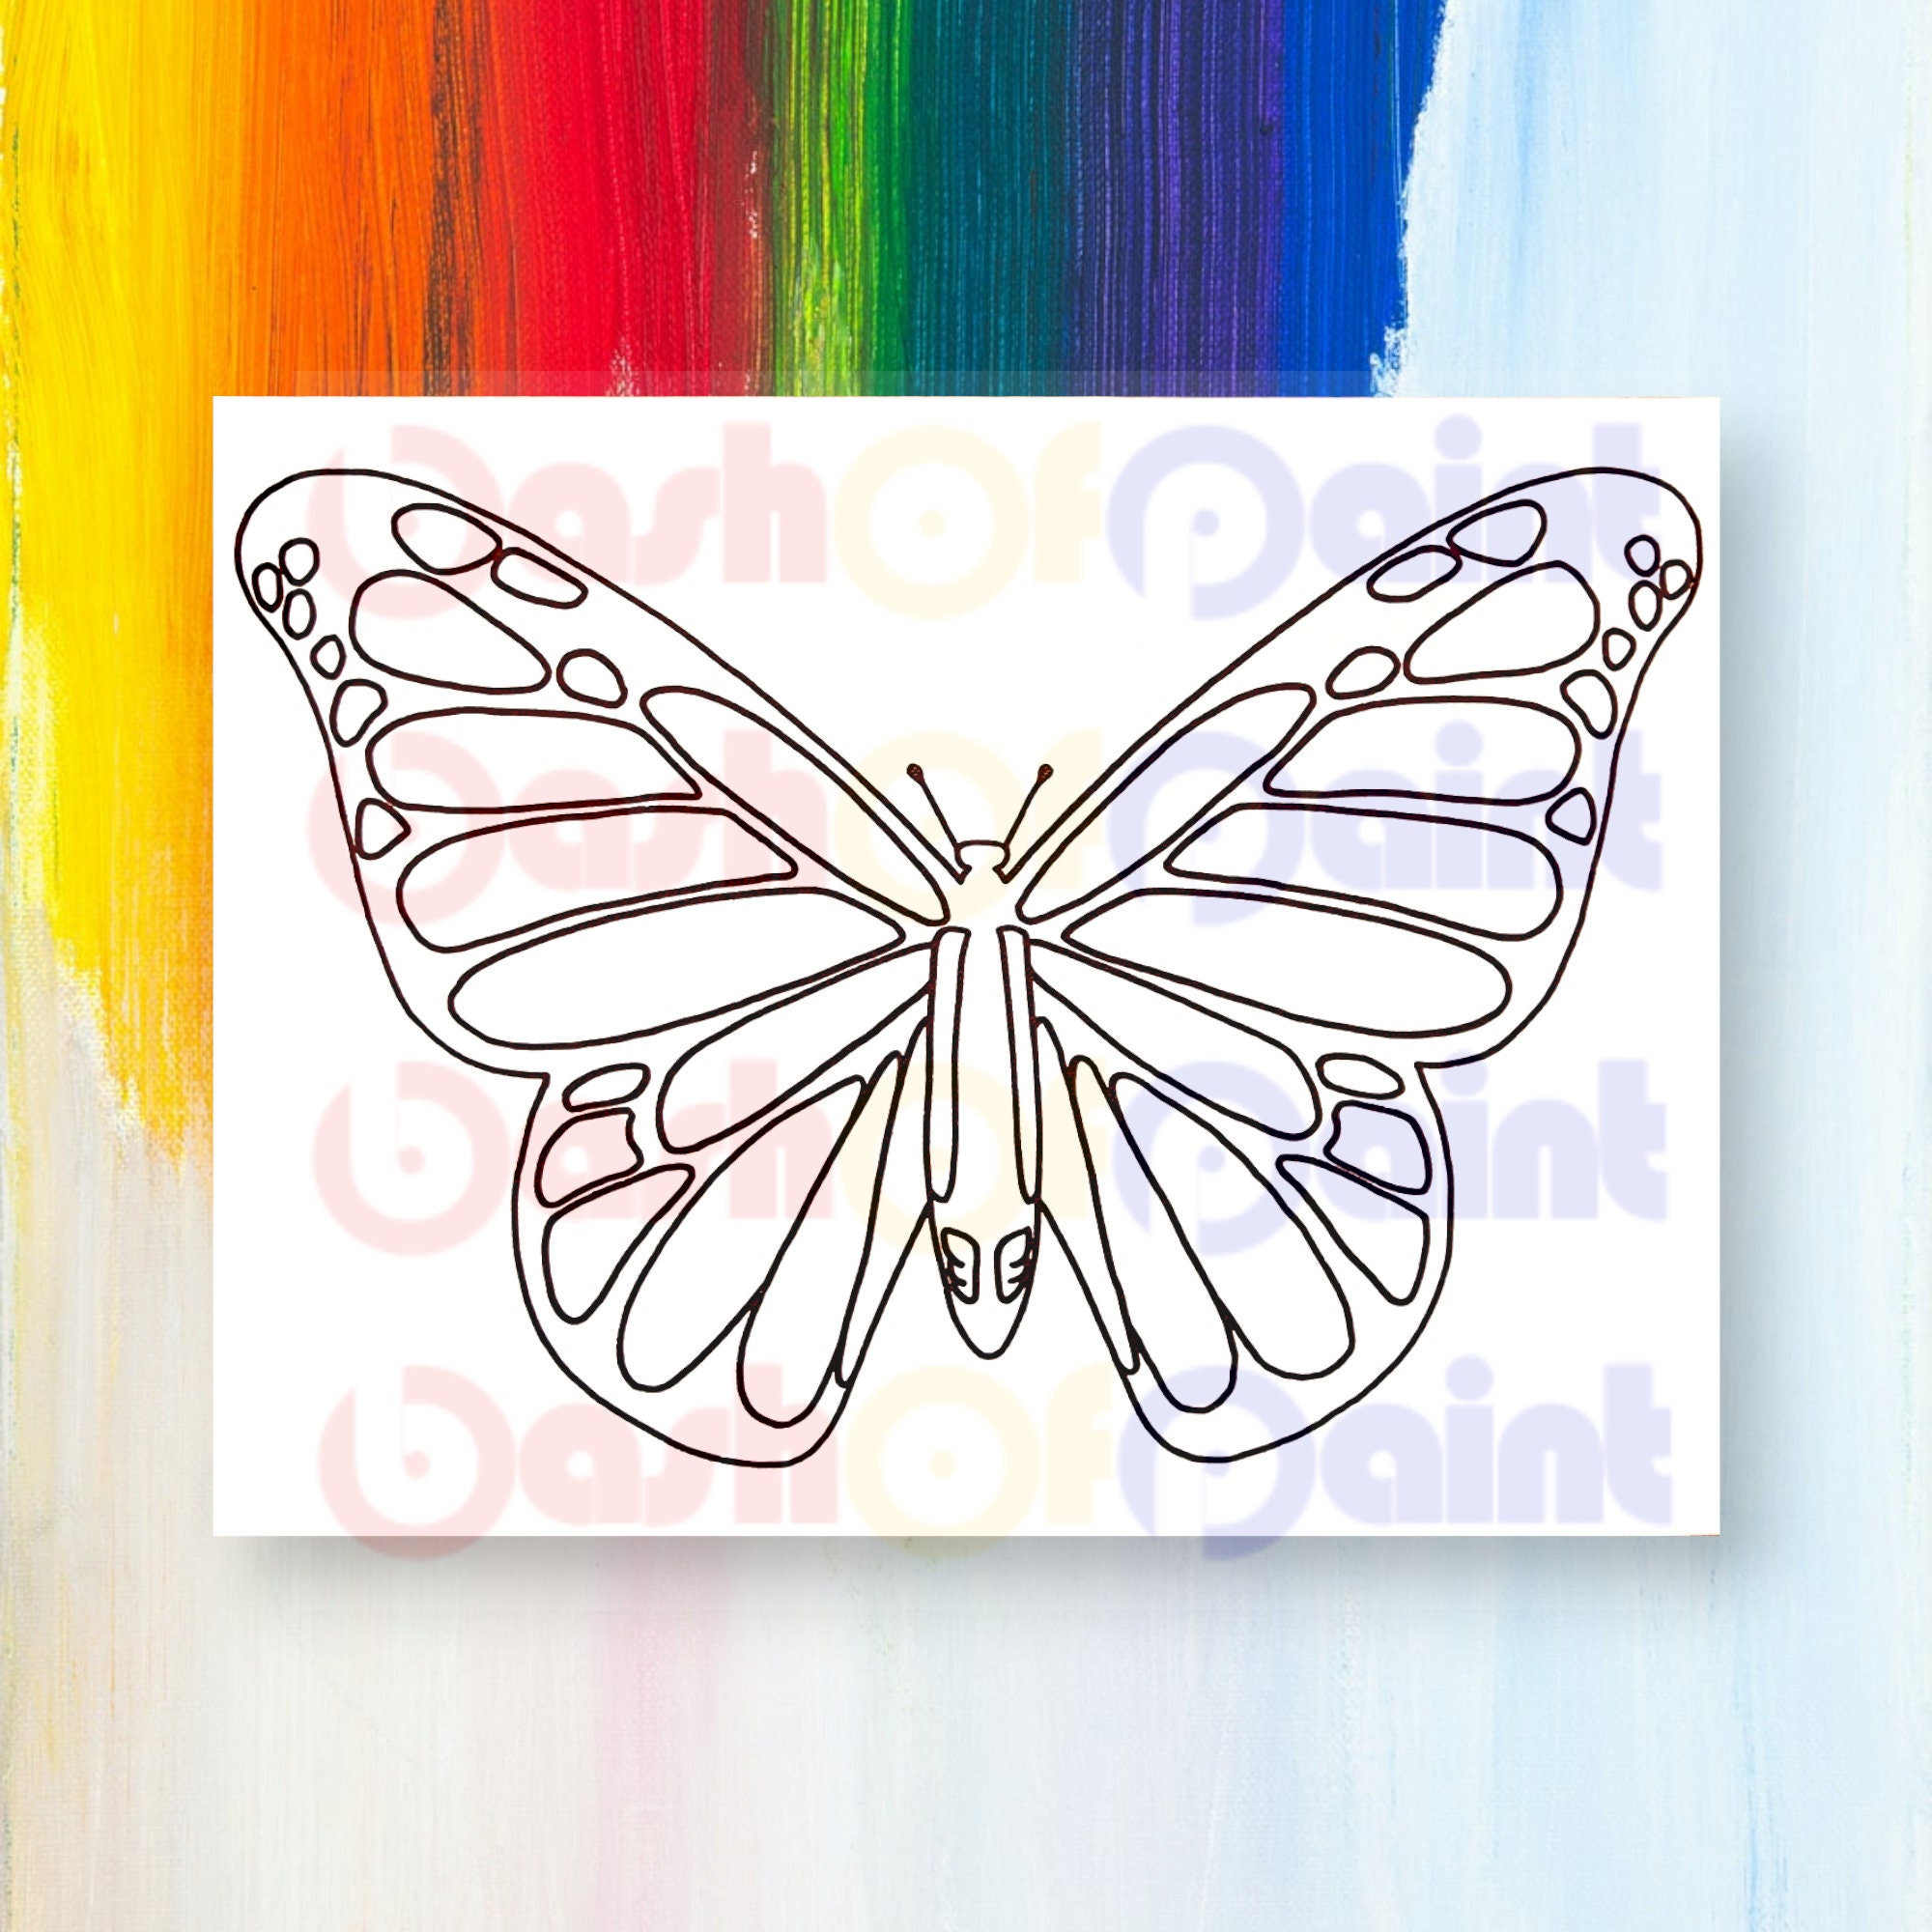 Pre Drawn Canvas for Painting for Kids Adults Paint – 12 Pcs Acrylic Paint  Kit, 4 8x10 inch Canvases 3 Pre Drawn Canvas Unicorn, Sunflower, Butterfly  With1 Blank, Wood Easel : : Arts & Crafts